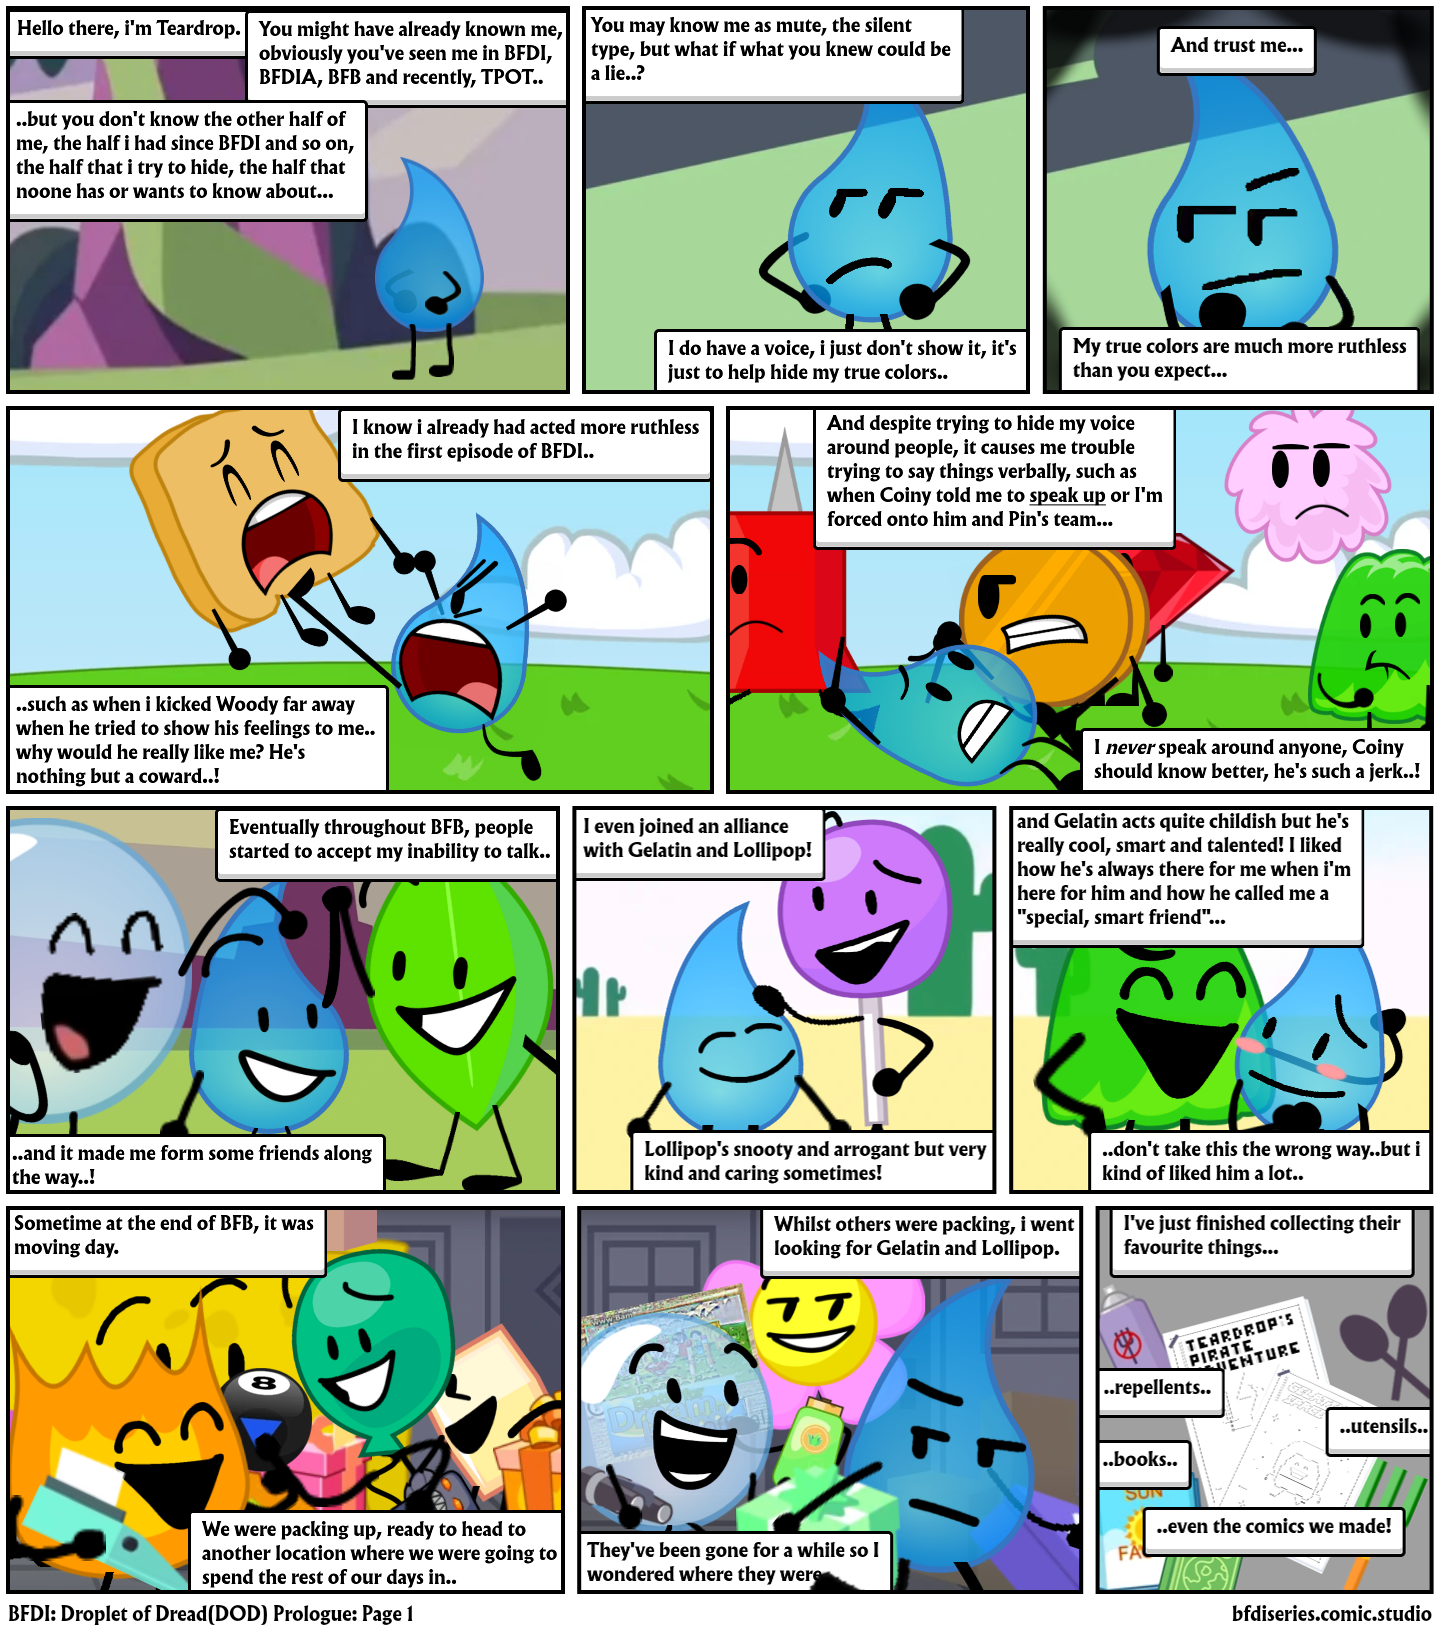 BFDI: Droplet of Dread(DOD) Prologue: Page 1